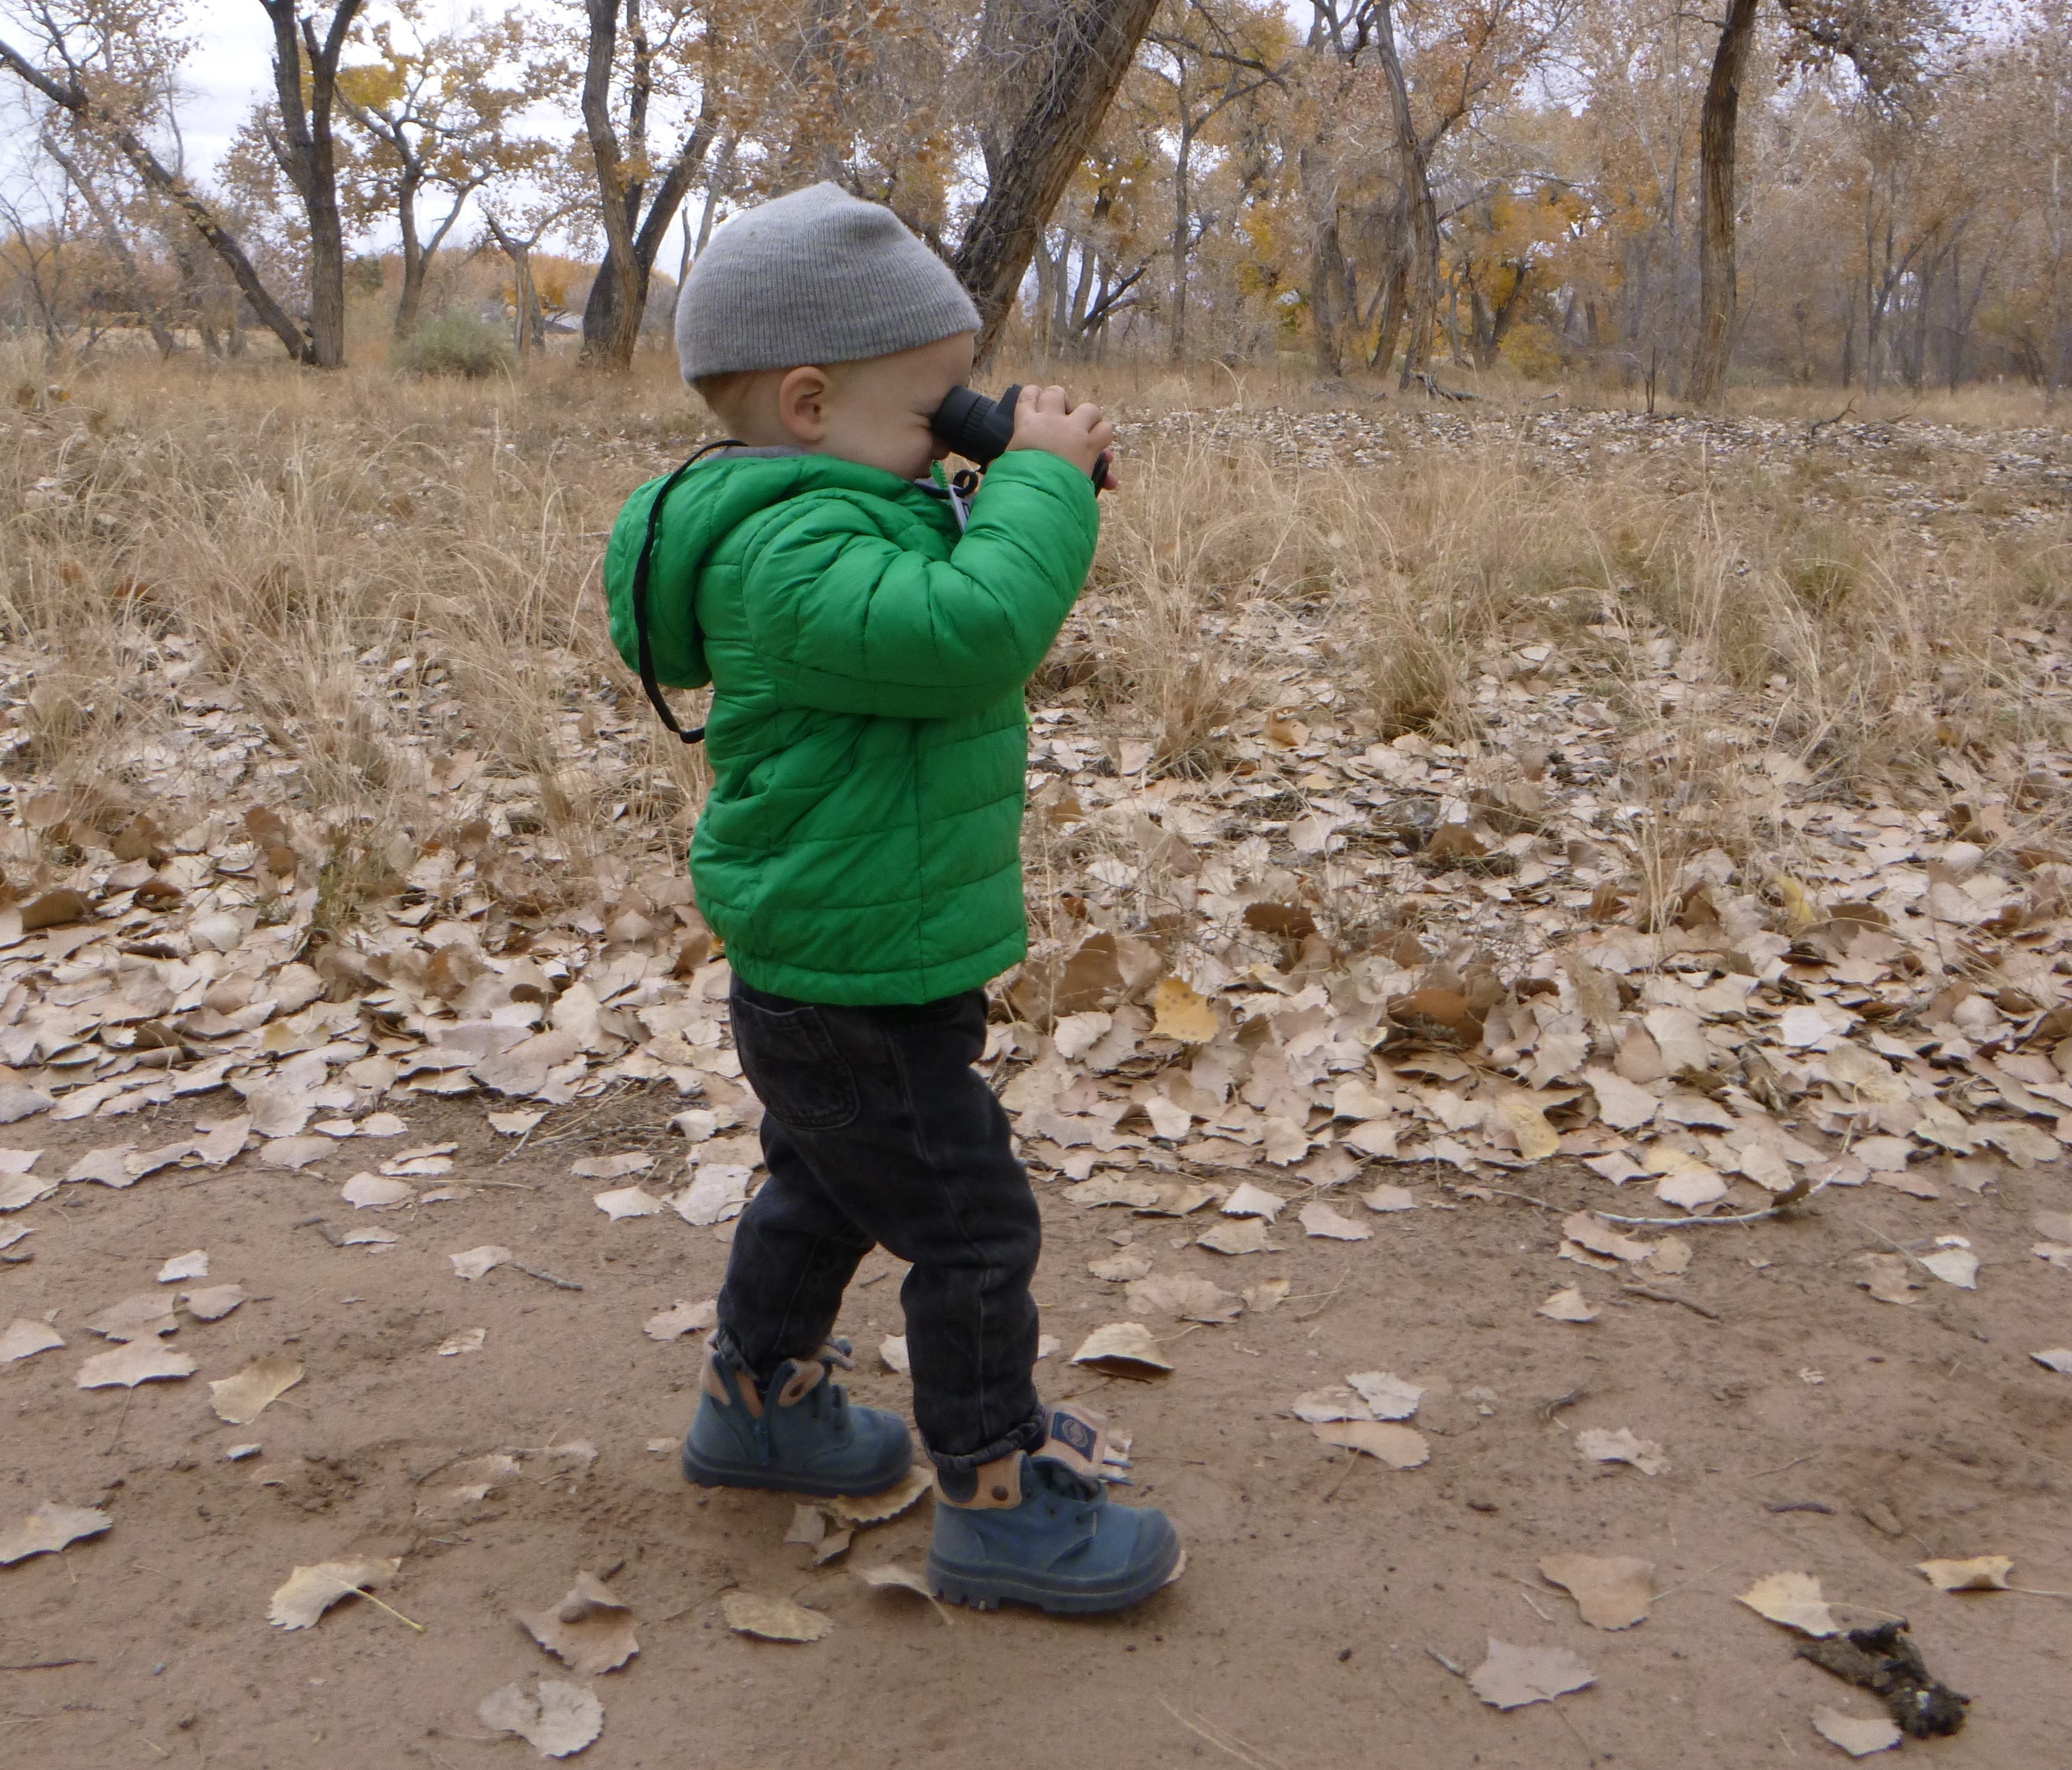 Image of a child walking on a Bosque trail wearing a green jacket, gray beanie, and holding binoculars over their eyes and looking into the distance. Leaves are dispersed on the ground and trees are on the background.